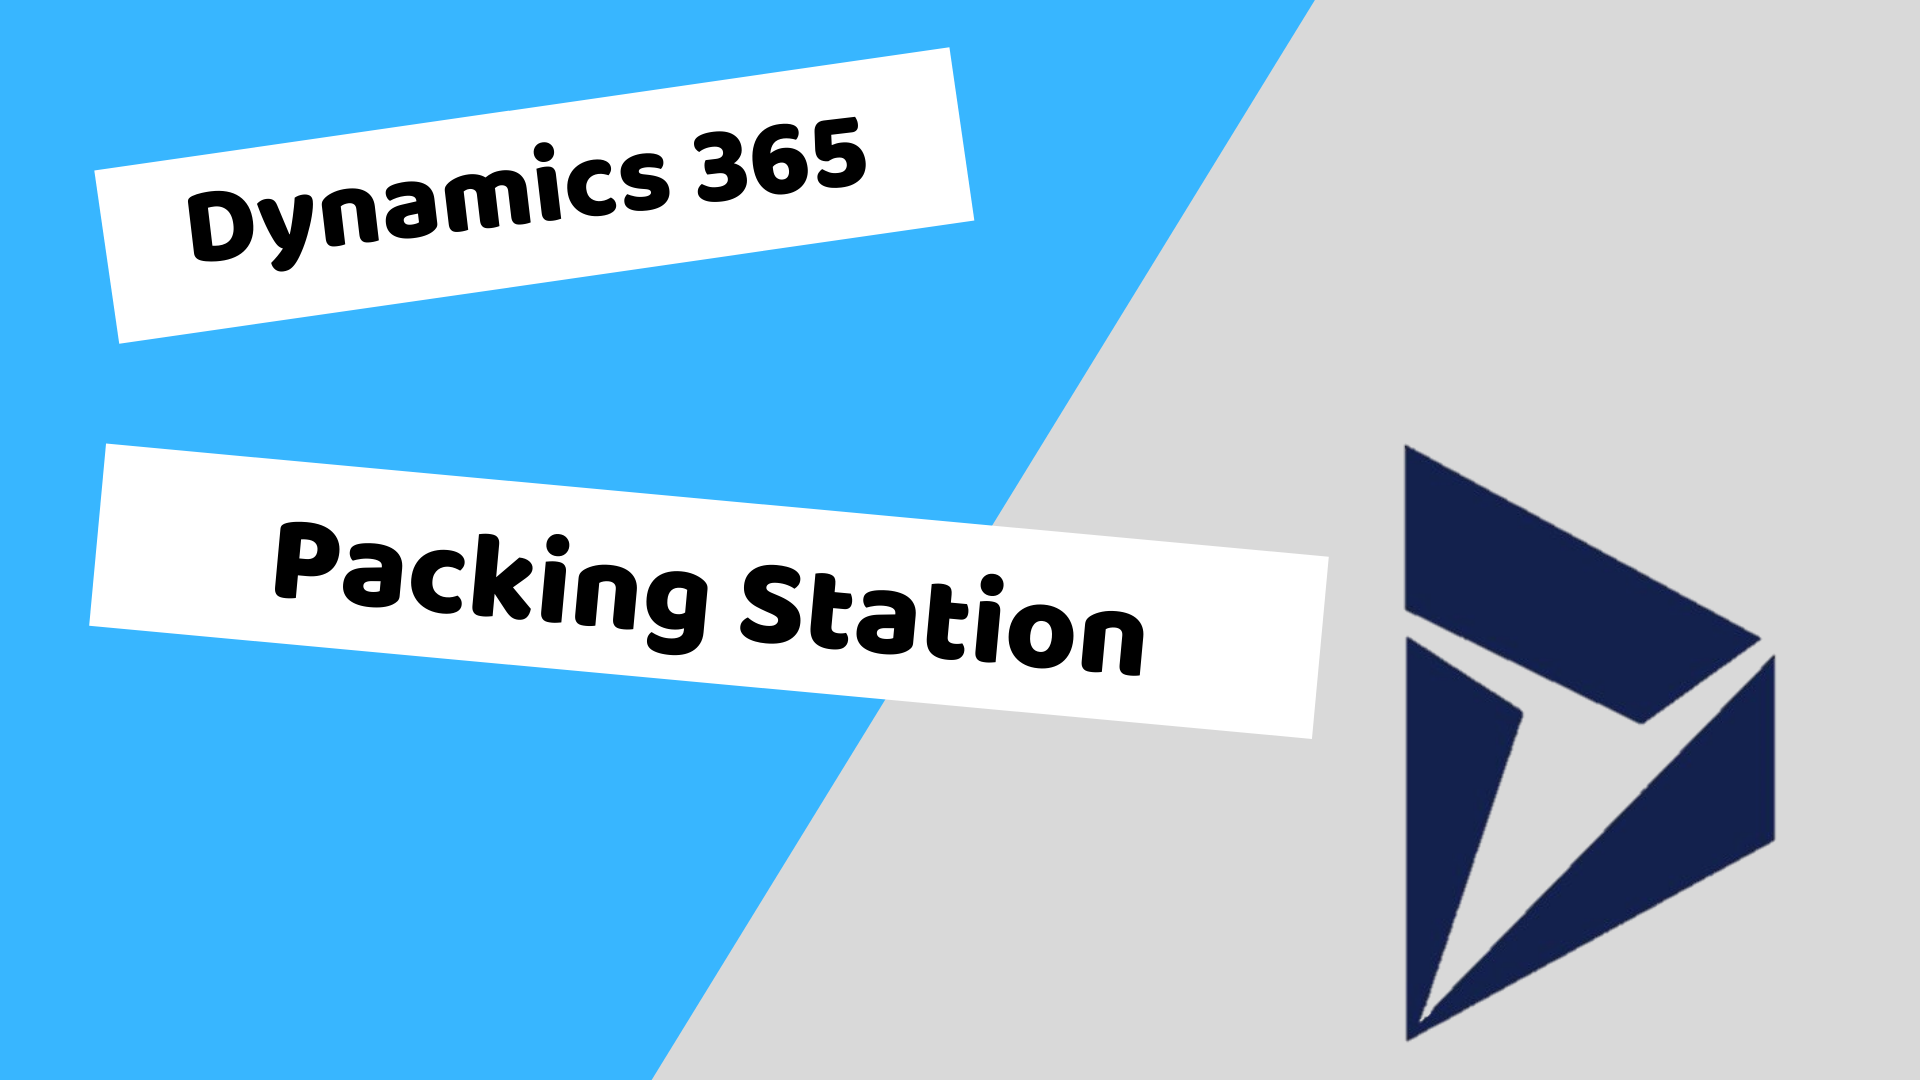 You are currently viewing Packing Station in Dynamics 365 Advanced Warehouse